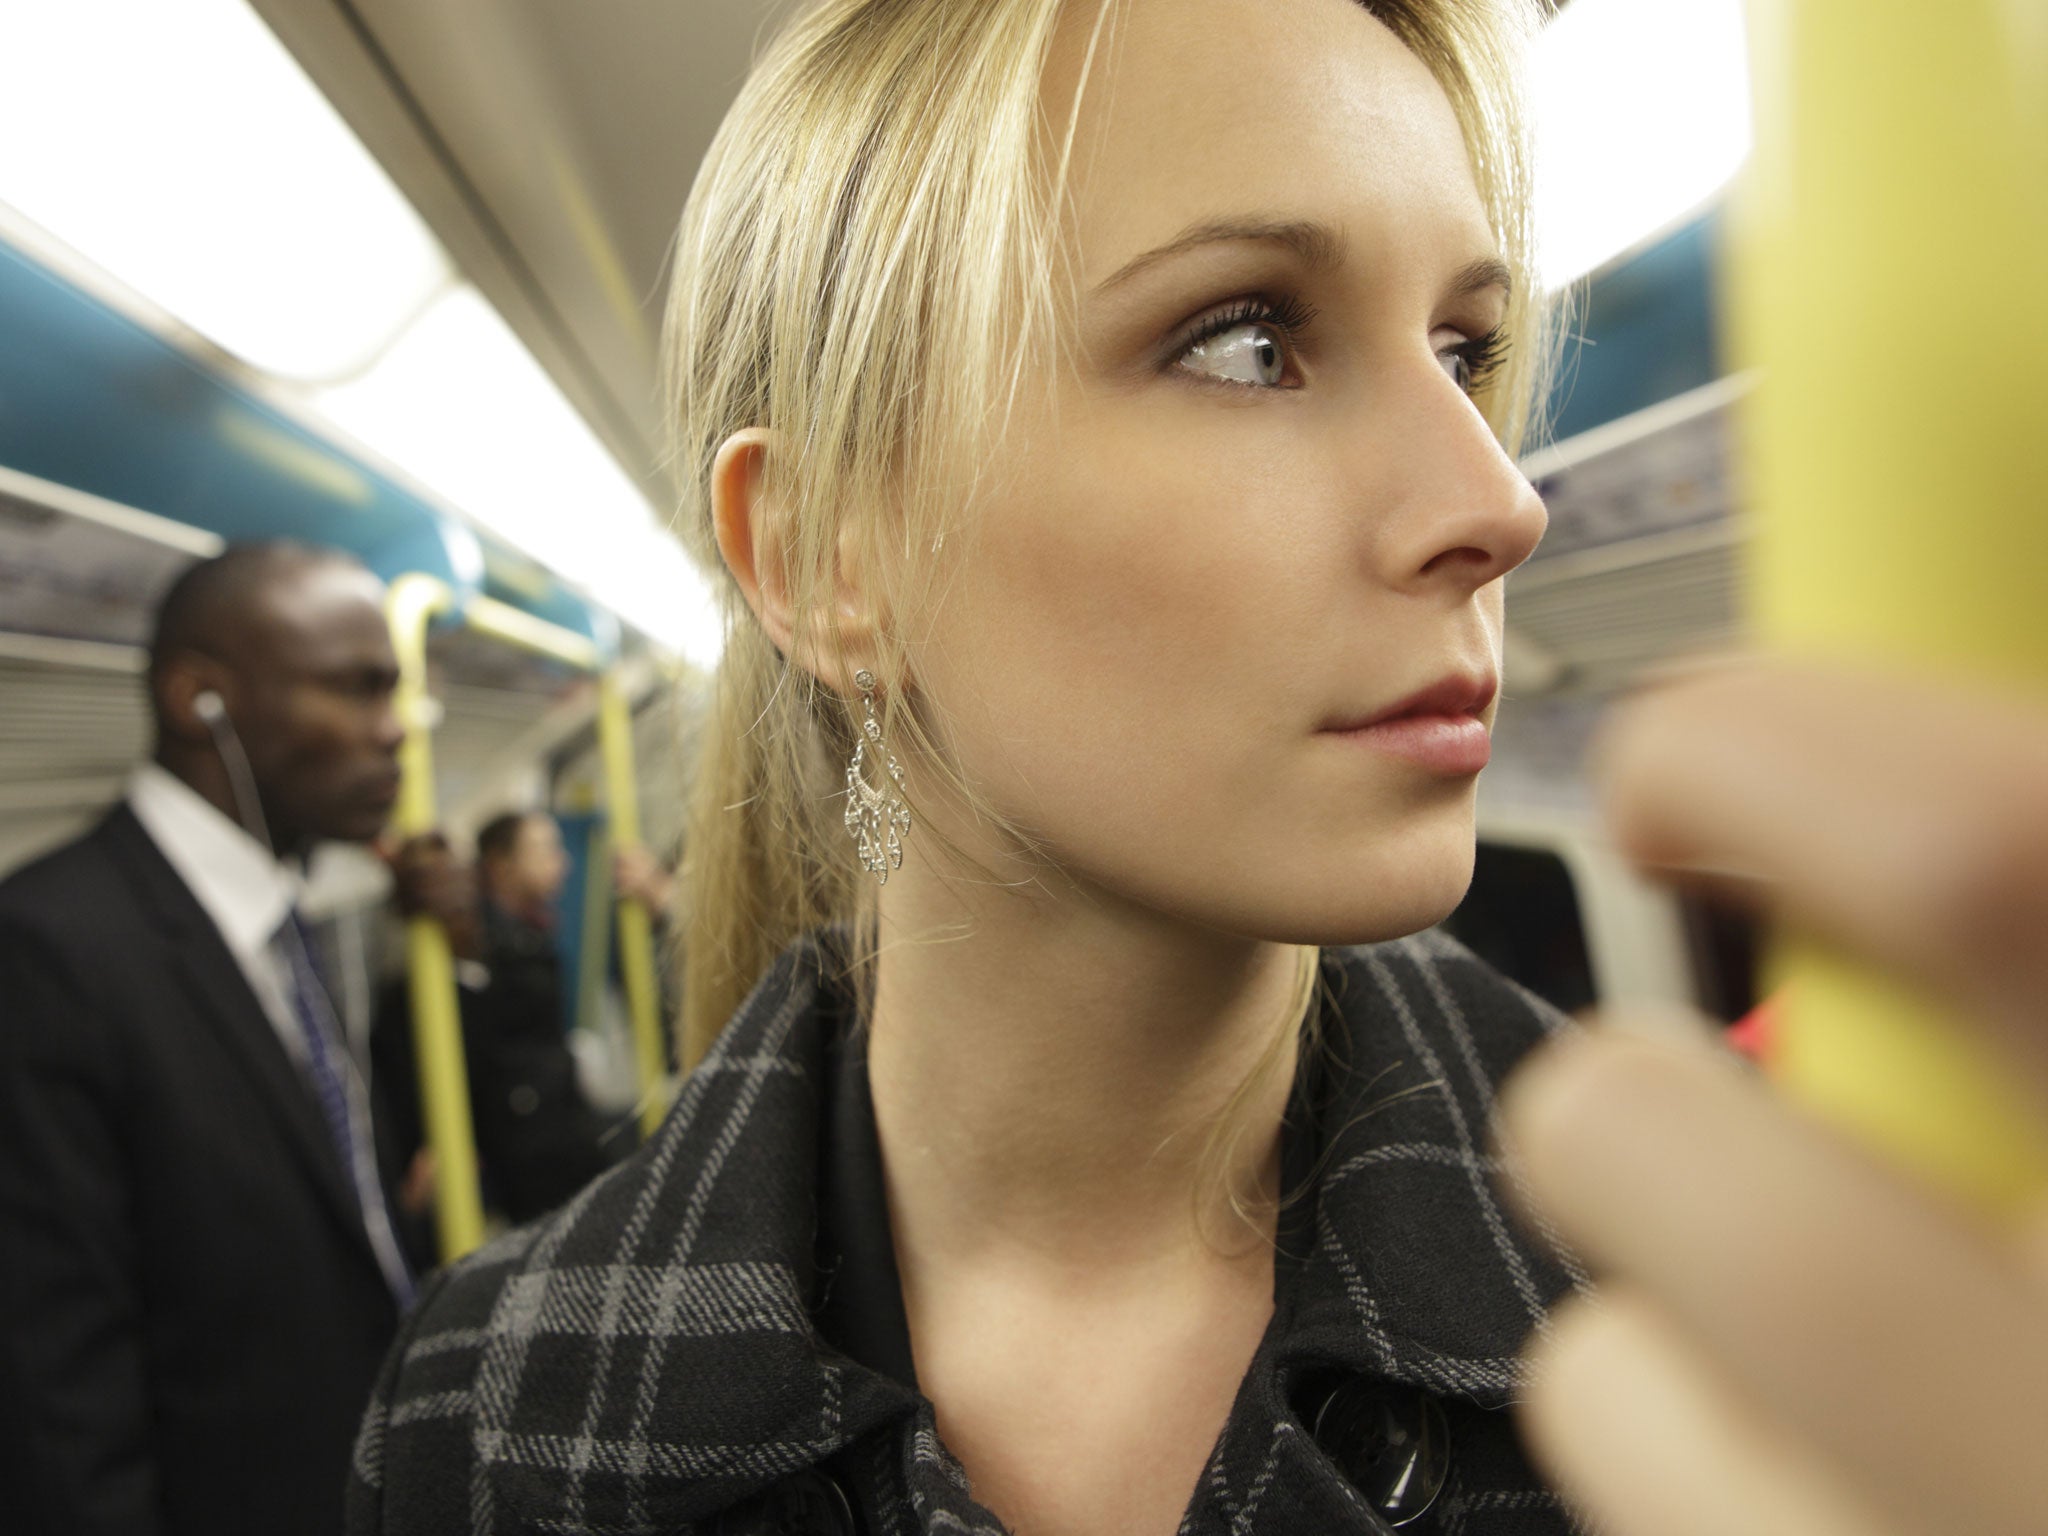 More than eight per cent of UK adults have photographed attractive strangers on public transport